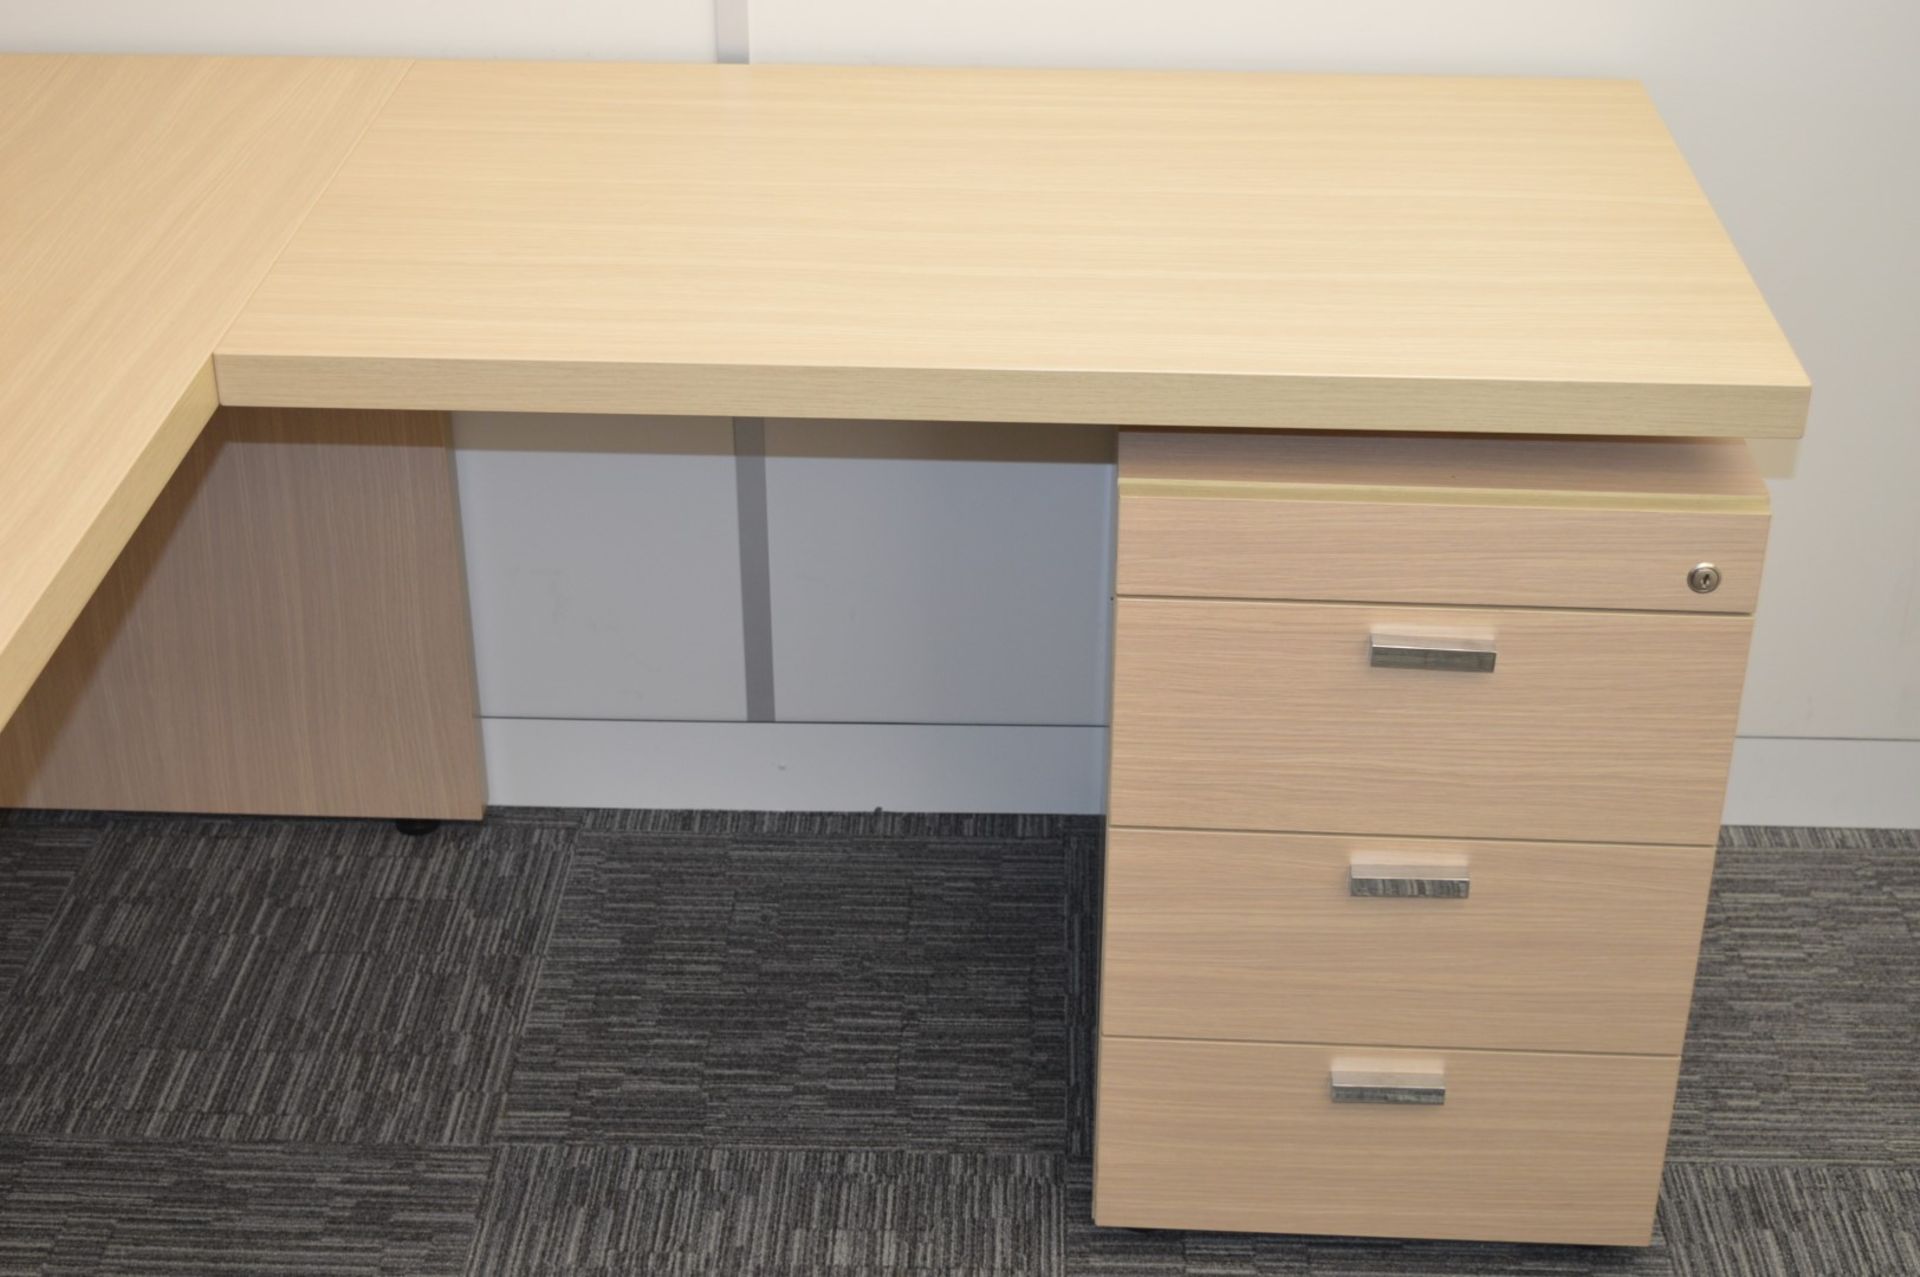 1 x Babini Executives Office Desk With Three Drawer Pedestal and Side Table - Attractive Finish With - Image 7 of 9